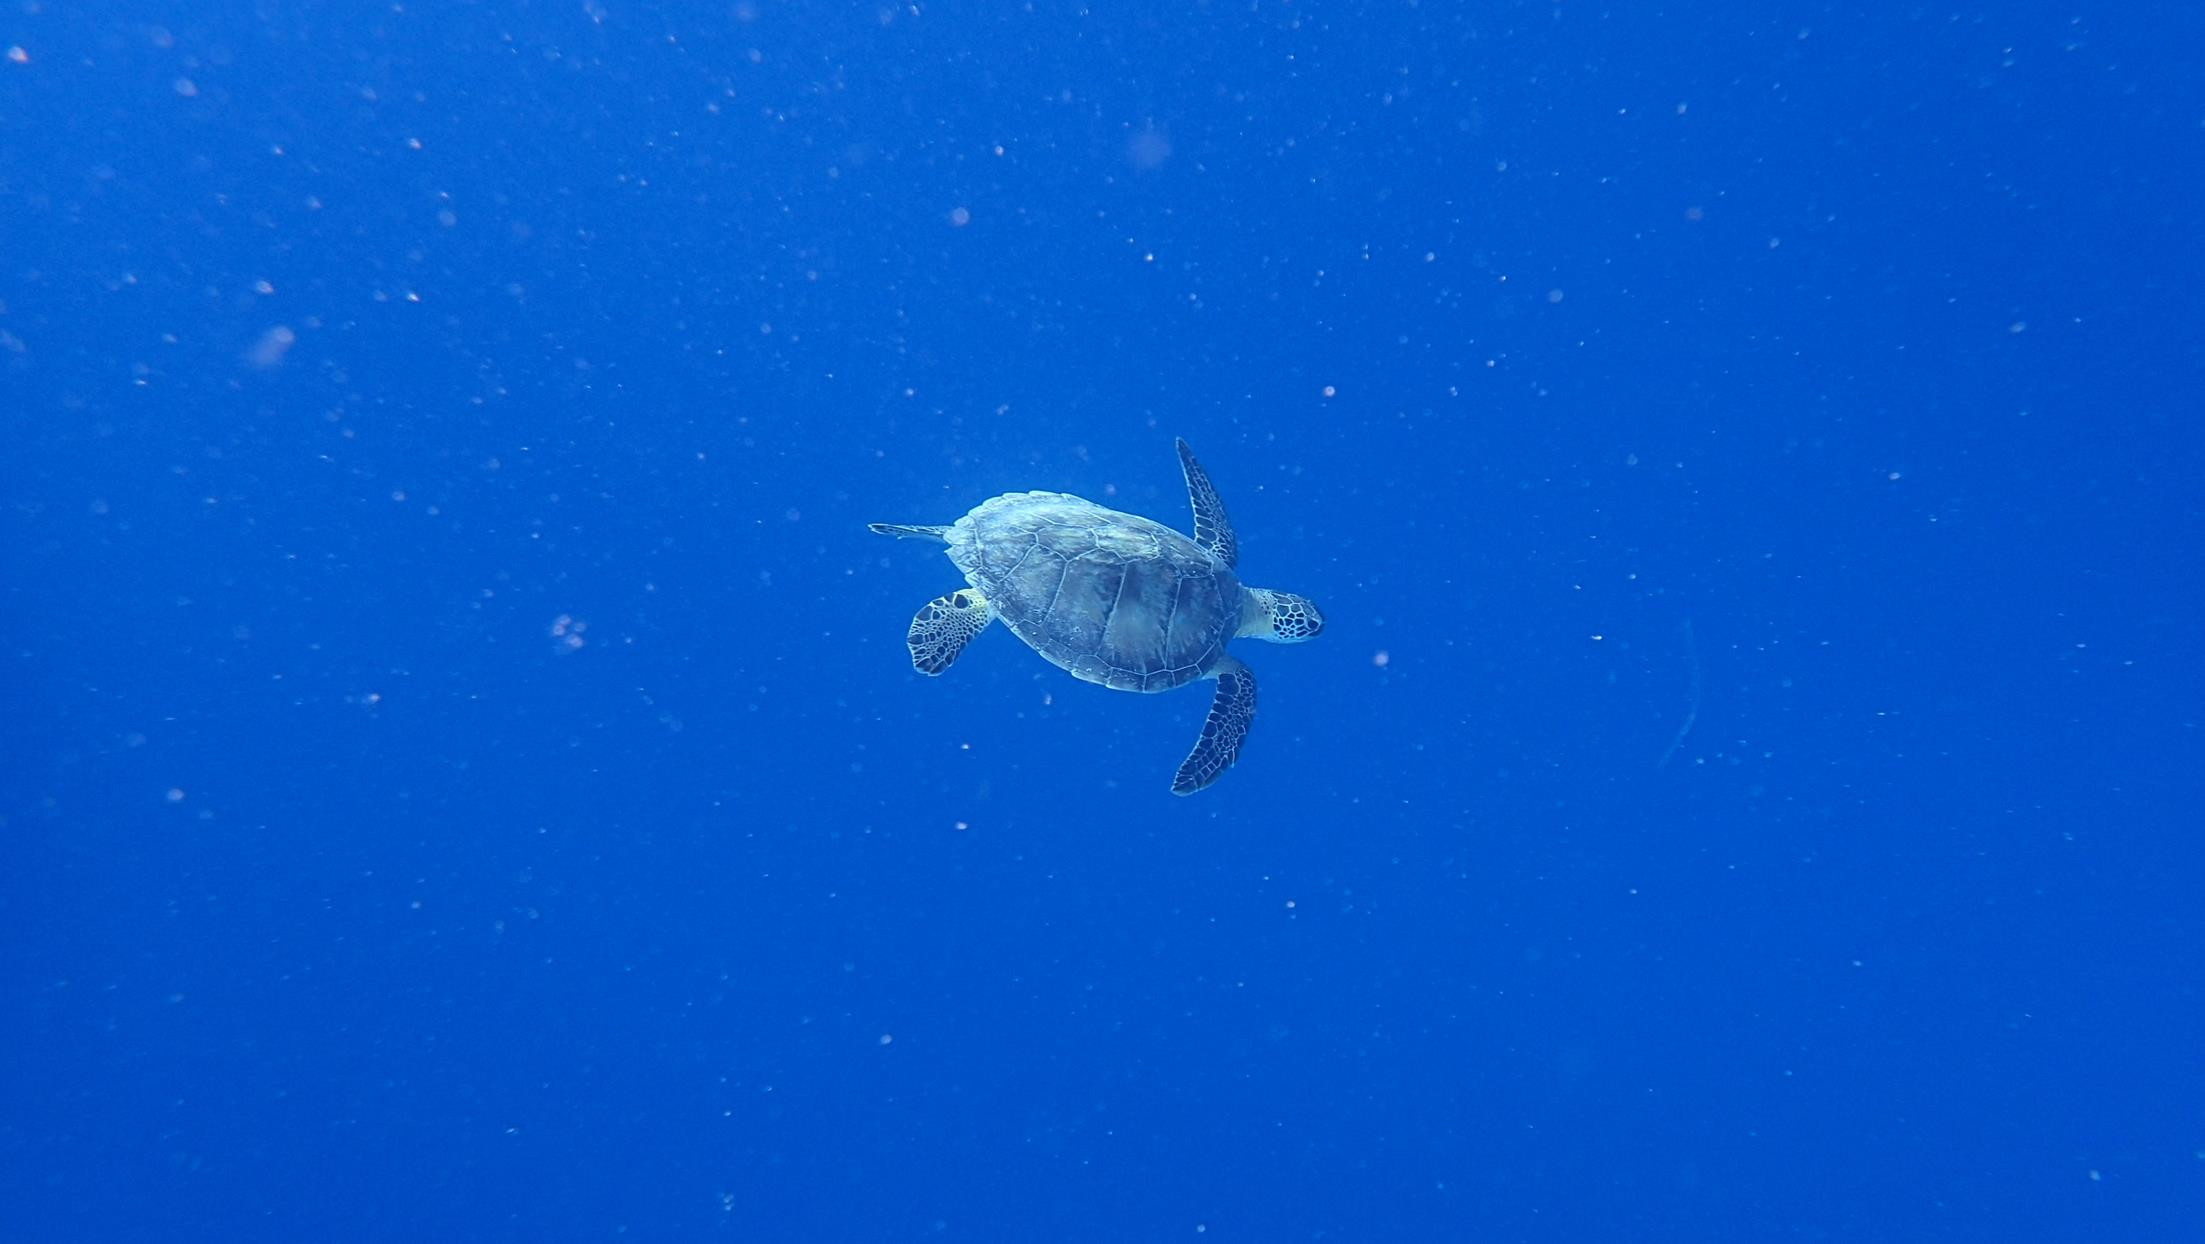 Swimming with this turtle was a special way to end a great week at Abu Dabbab